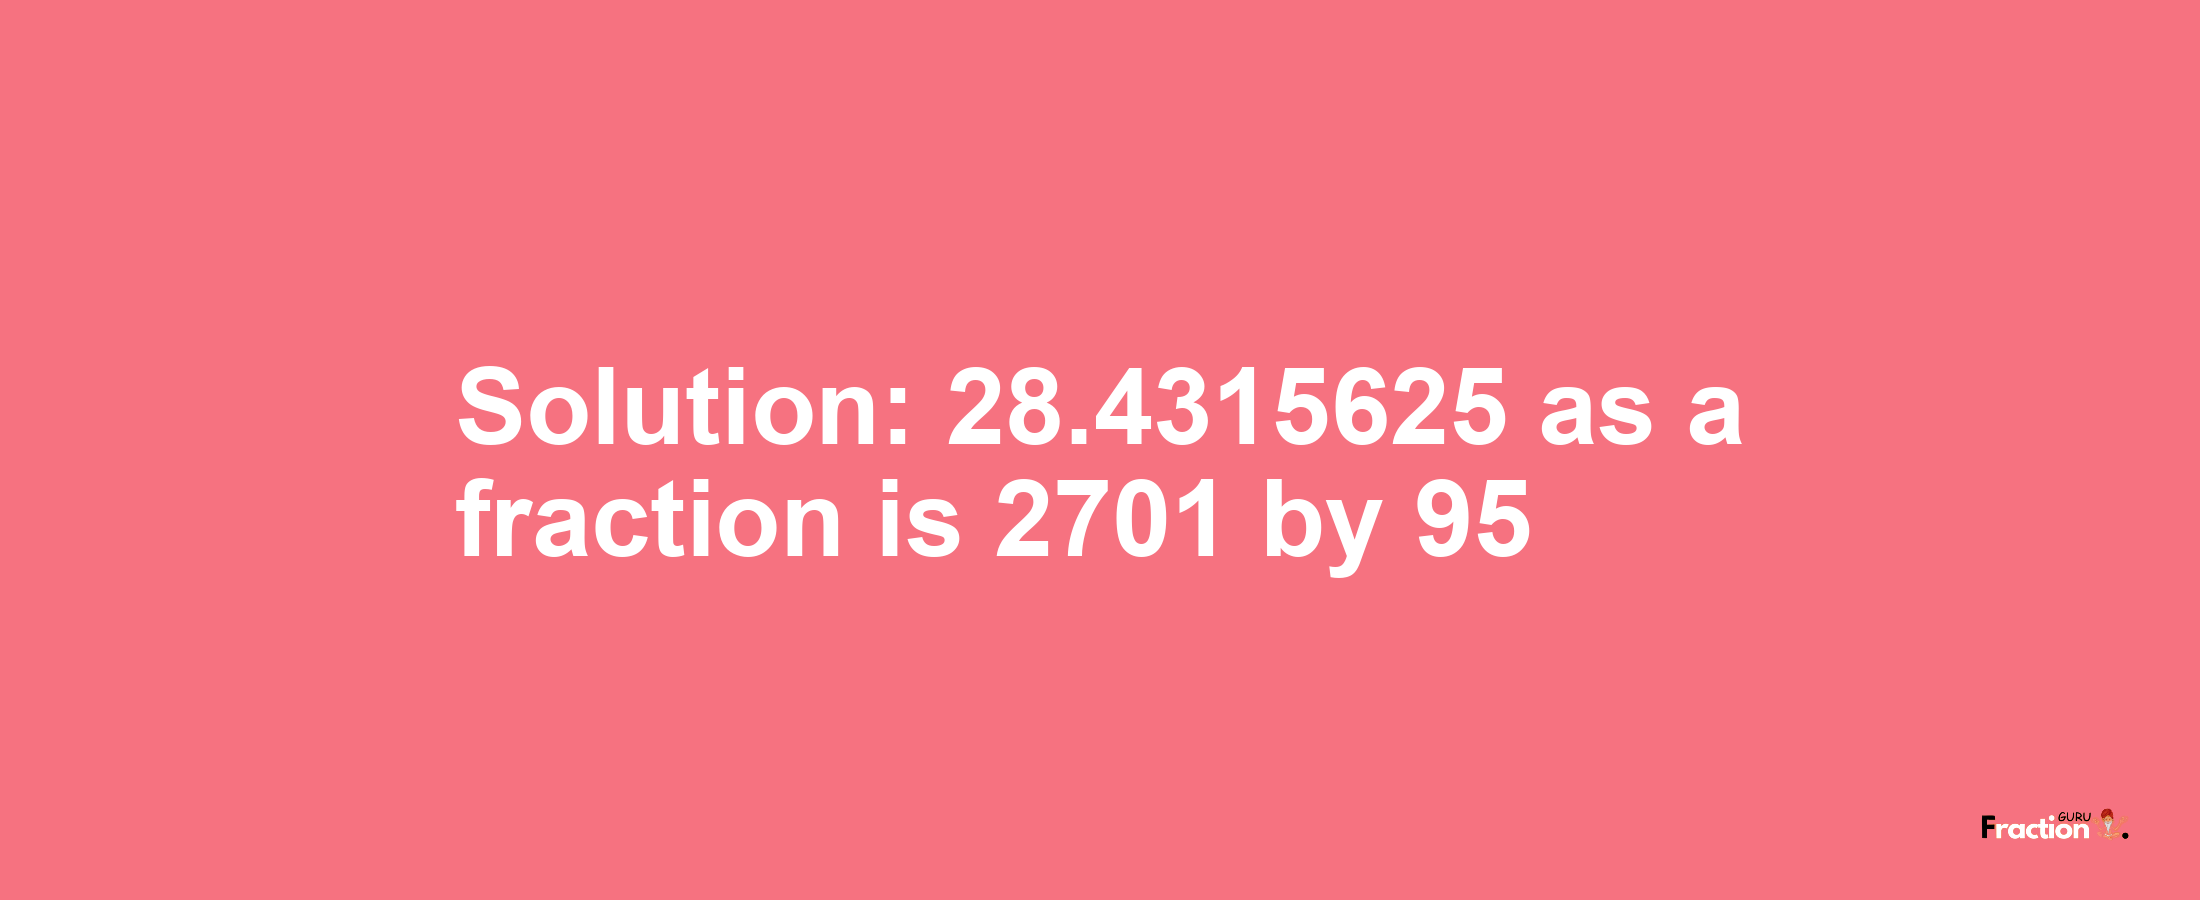 Solution:28.4315625 as a fraction is 2701/95